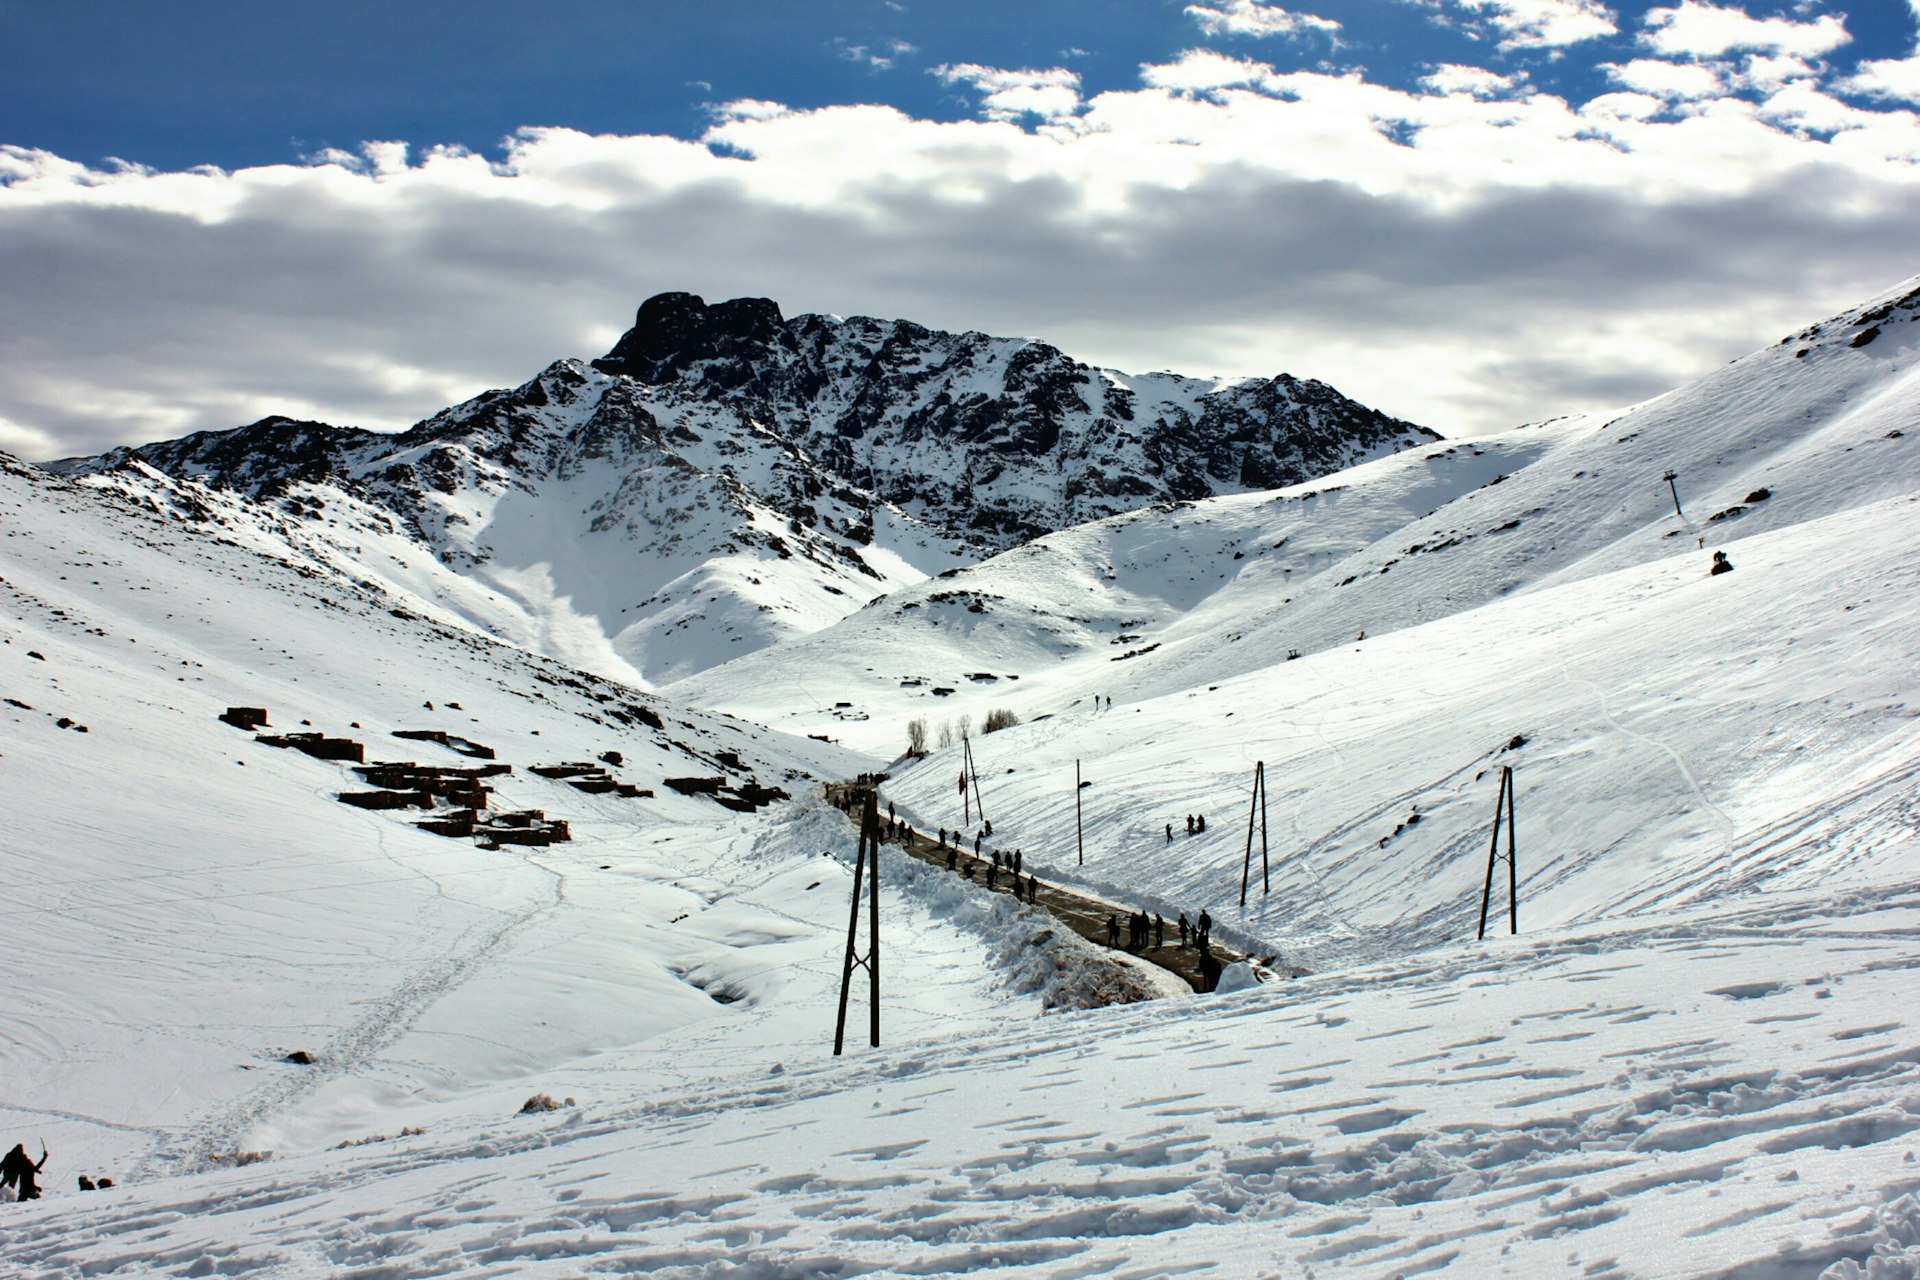 The High Atlas Mountains, Morocco, Okimeden is the spot for skiing